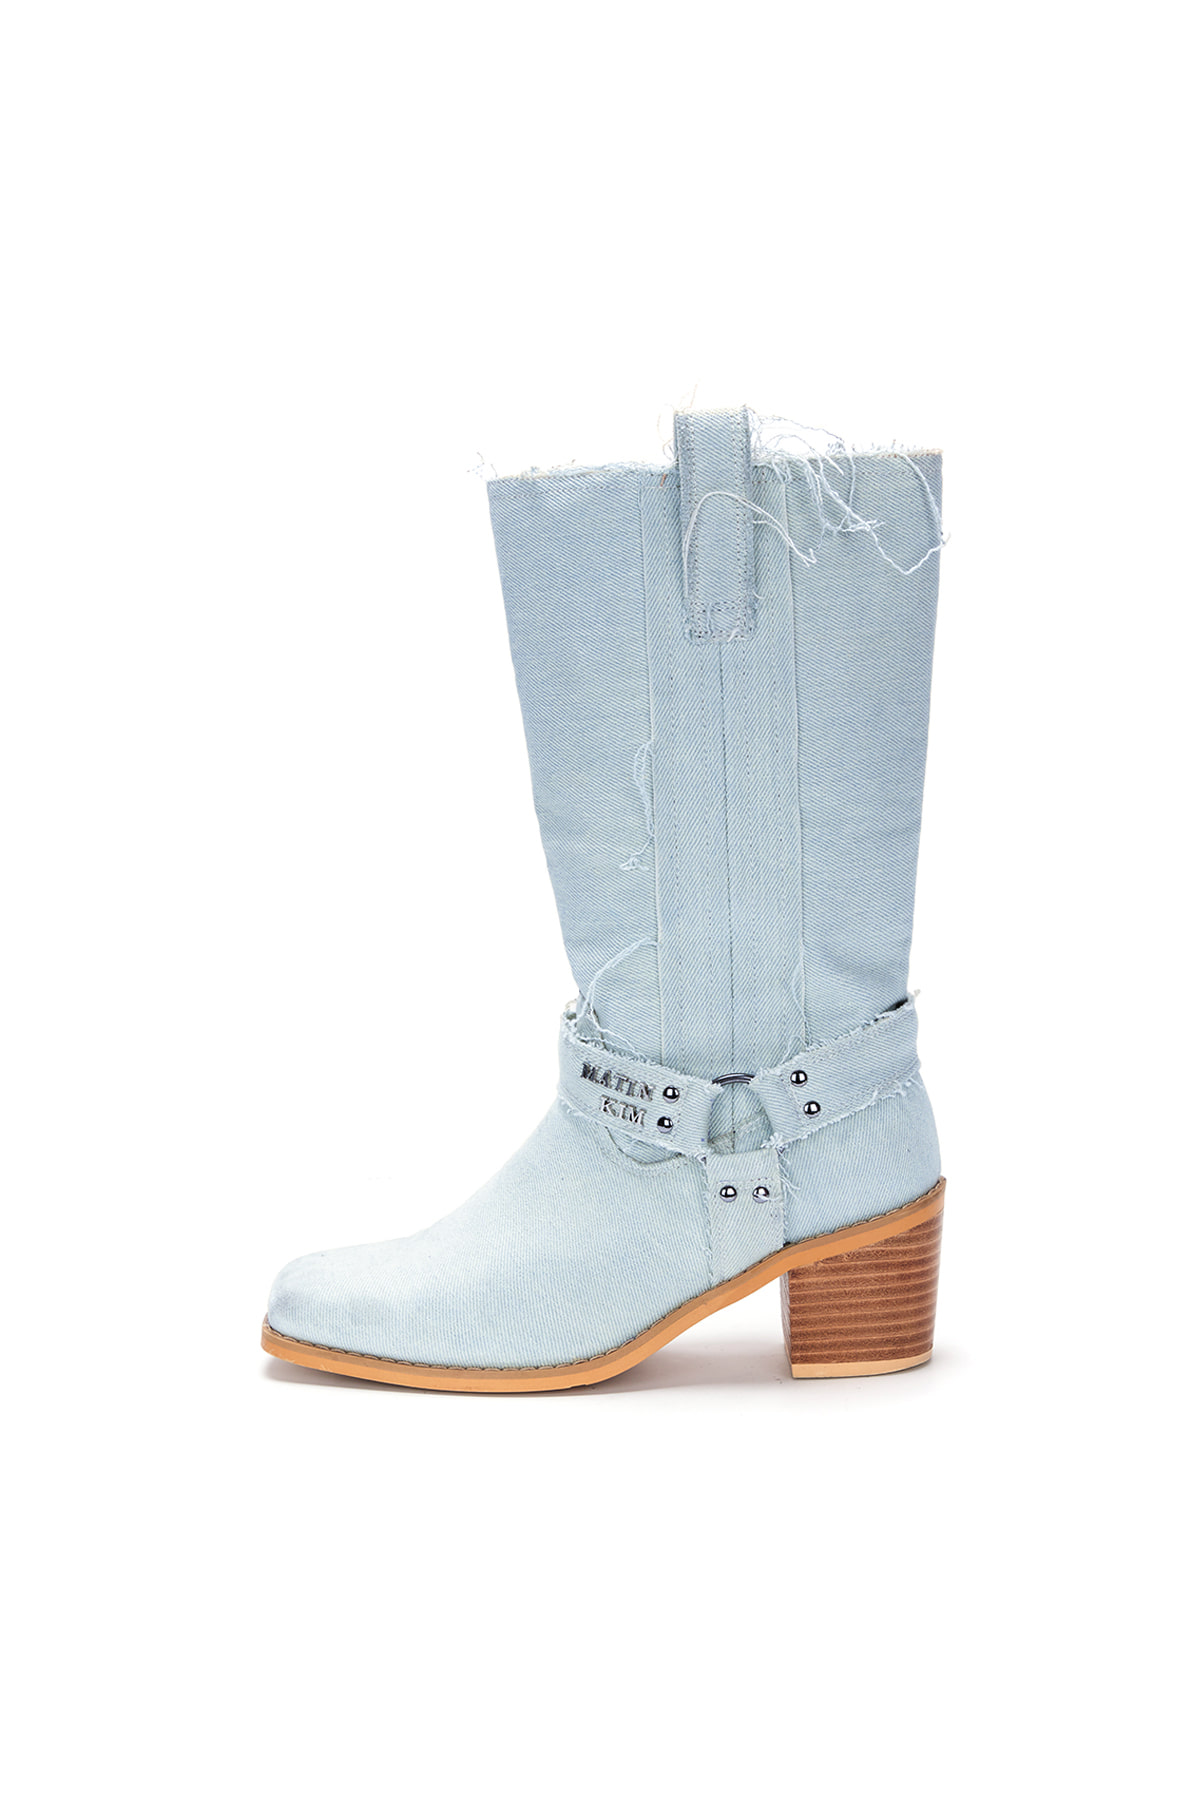 FABRIC MIX WESTERN BOOTS IN SKY